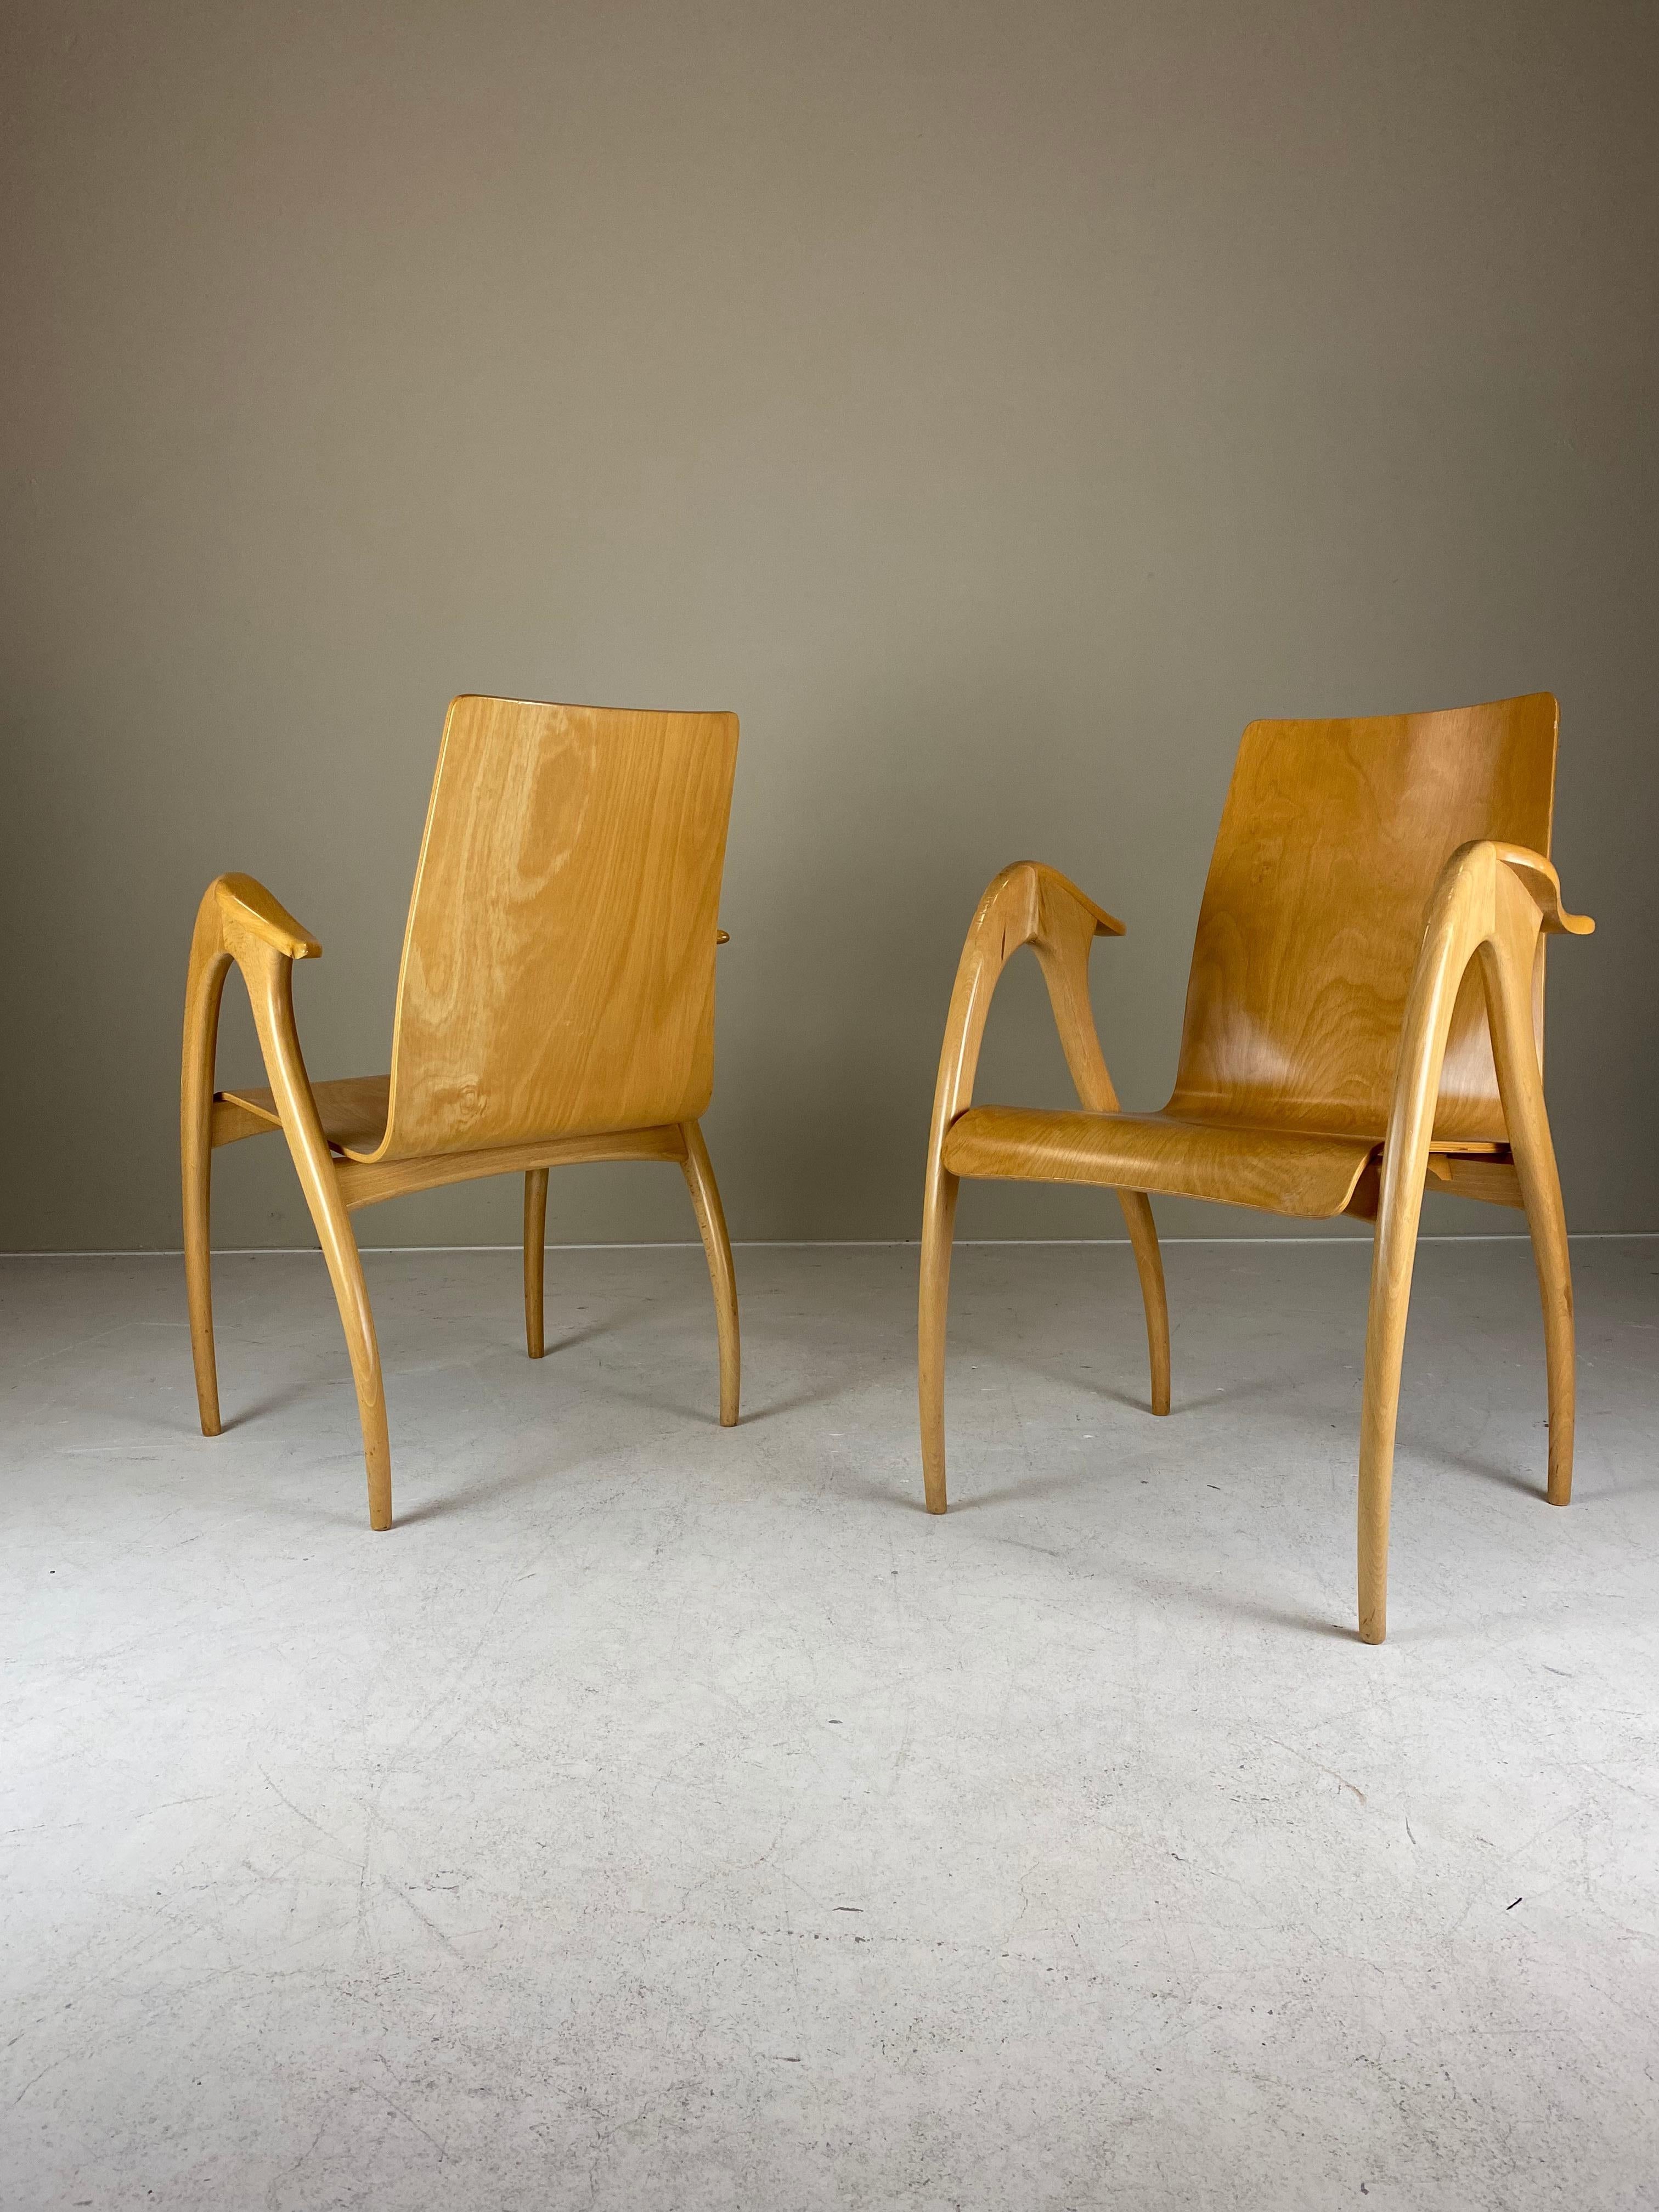 Italian Set of 4 Sculptural Plywood Armchairs by Malatesta and Mason, 1950s, Mid-Century For Sale